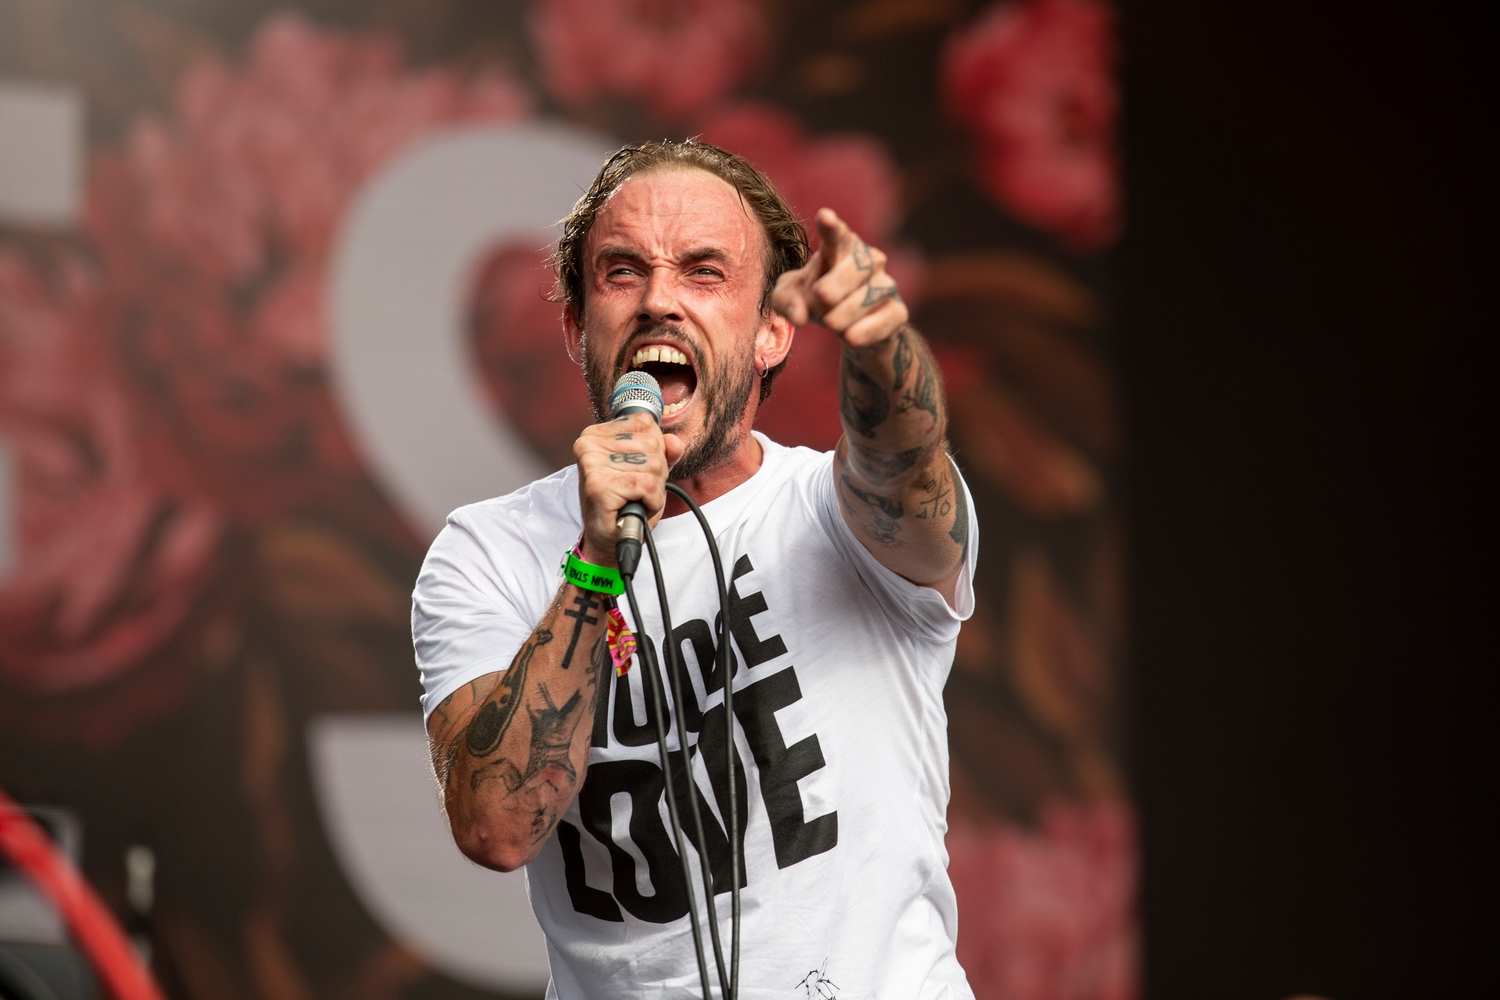 IDLES bring compassion and ferocity to Bestival 2018